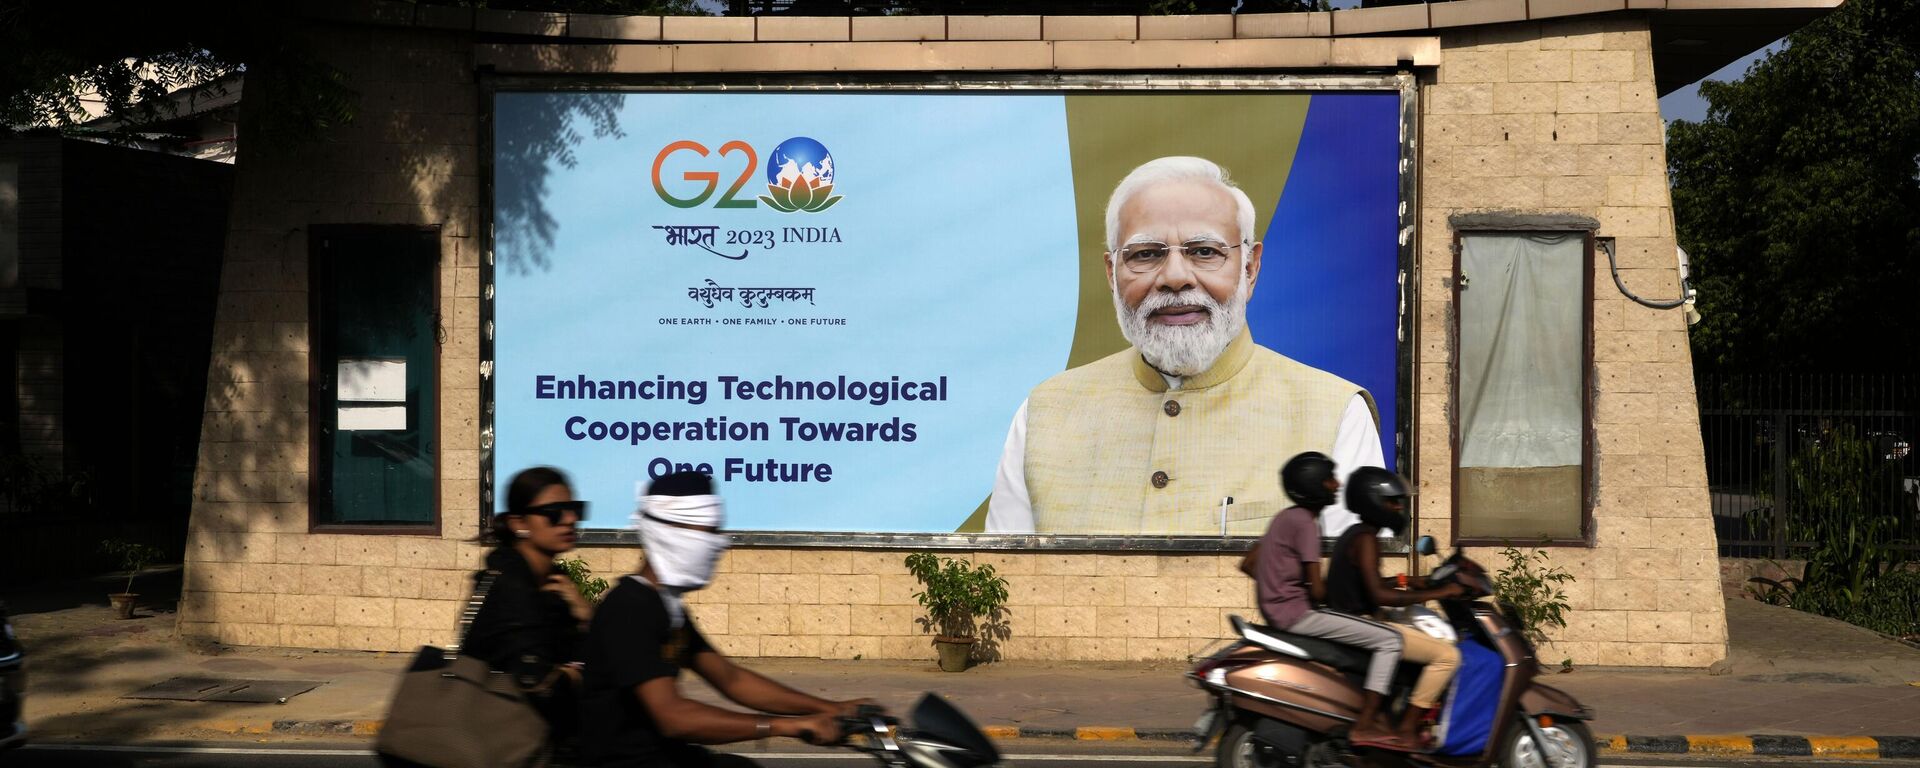 Motorcyclists drive past a billboard featuring Indian Prime Minister Narendra Modi ahead of this week's summit of the Group of 20 nations in New Delhi, India, Monday, Sept. 4, 2023. - Sputnik India, 1920, 06.09.2023